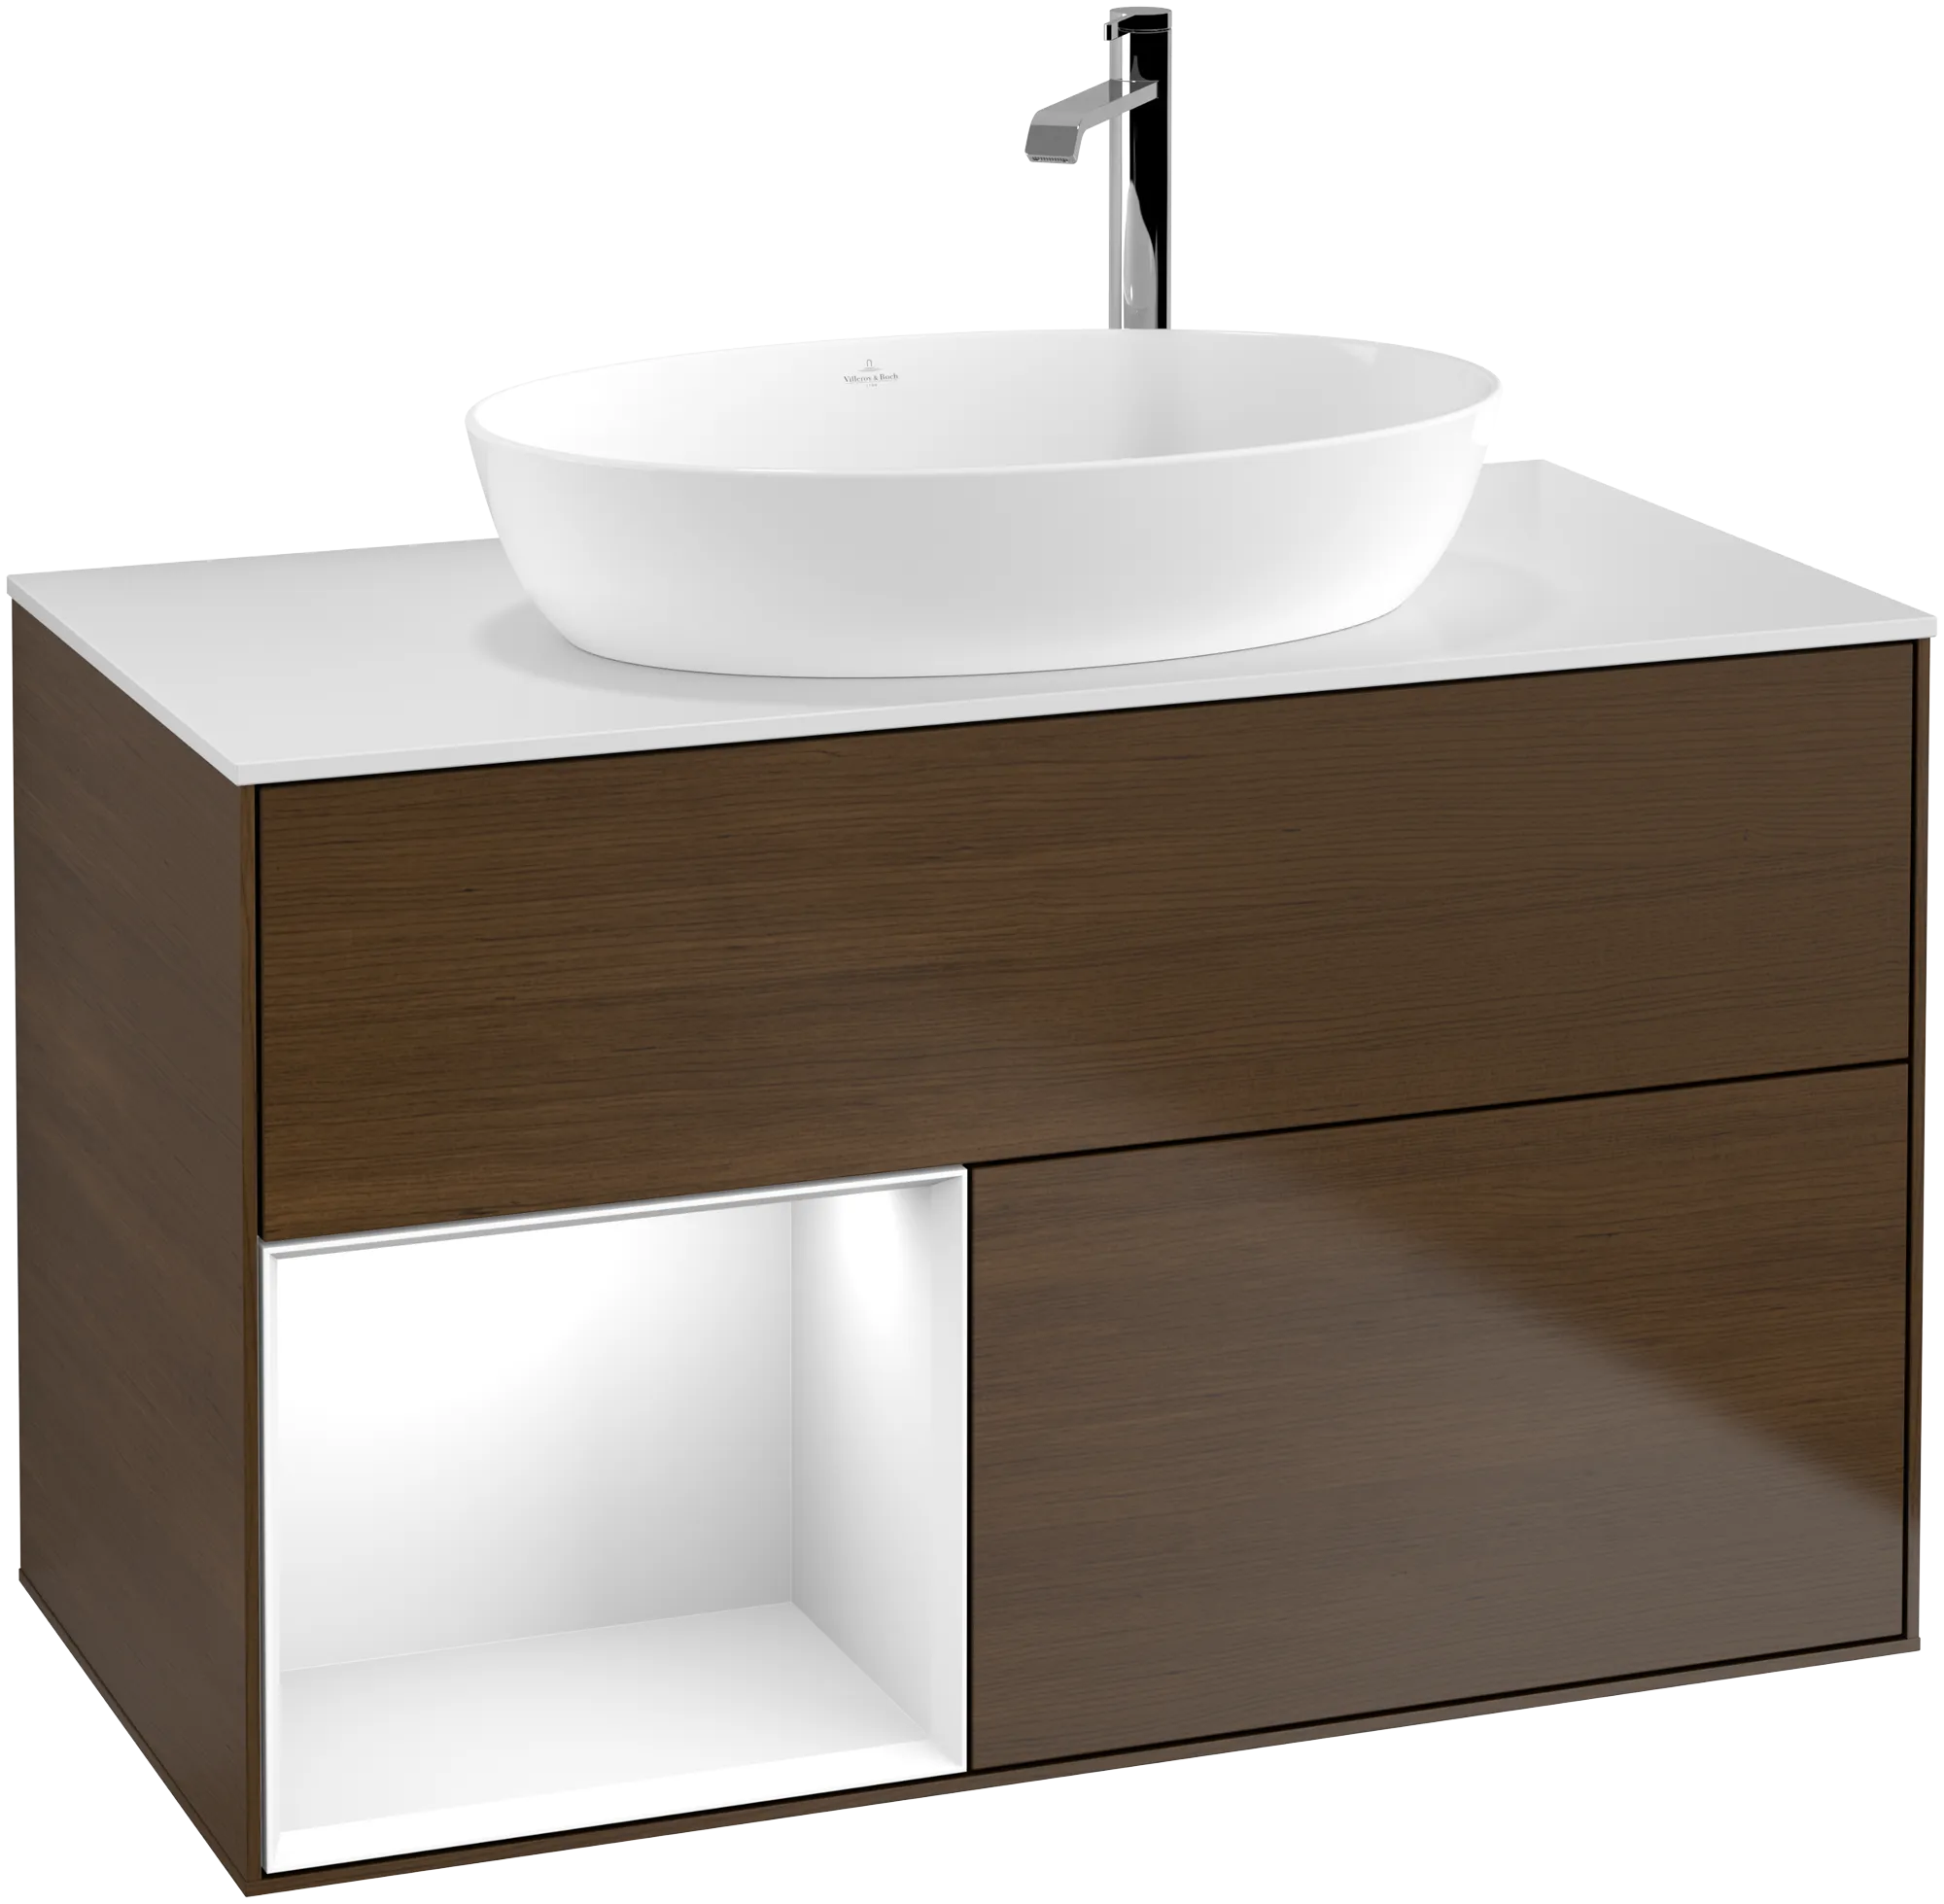 Obrázek VILLEROY BOCH Finion Vanity unit, with lighting, 2 pull-out compartments, 1000 x 603 x 501 mm, Walnut Veneer / Glossy White Lacquer / Glass White Matt #G891GFGN